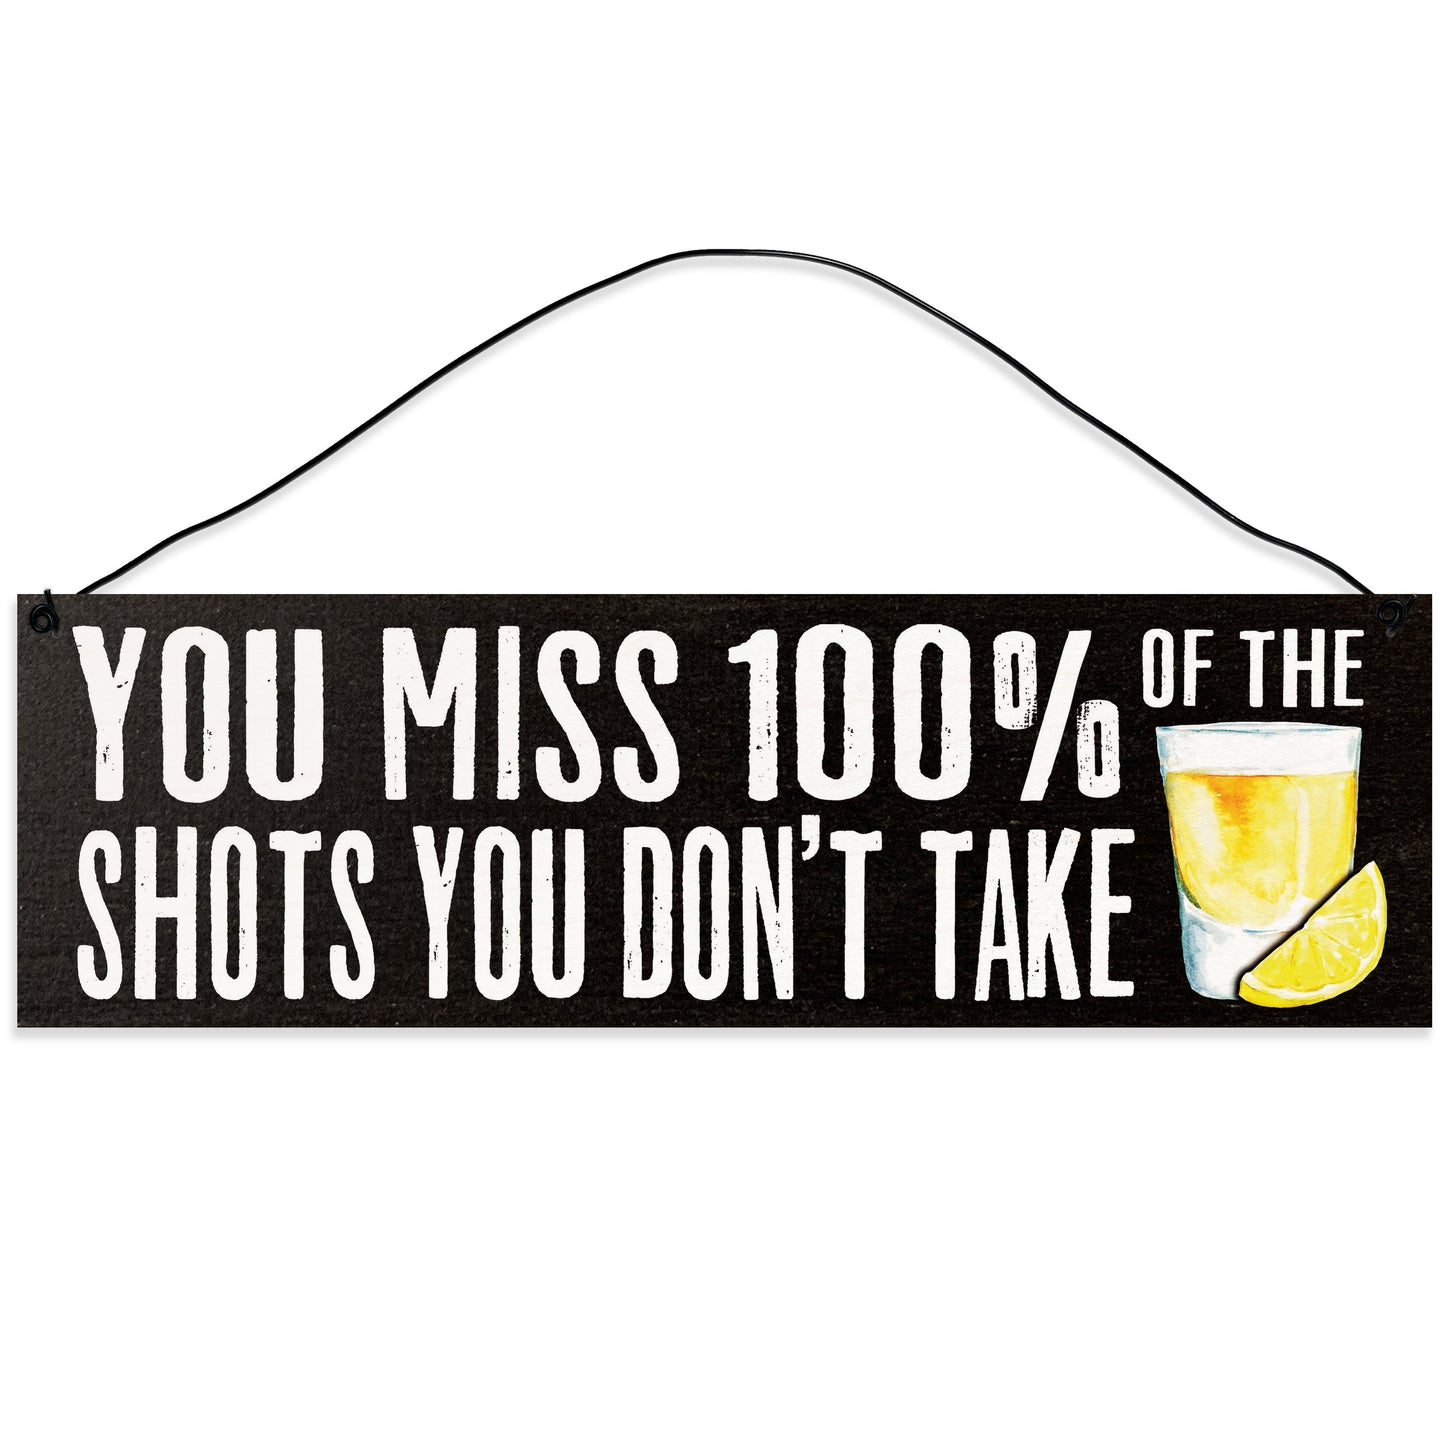 Sawyer's Mill - Alcohol. You Miss 100% of the Shots You Don't Take. Wood Sign for Home or Office. Measures 3x10 inches.